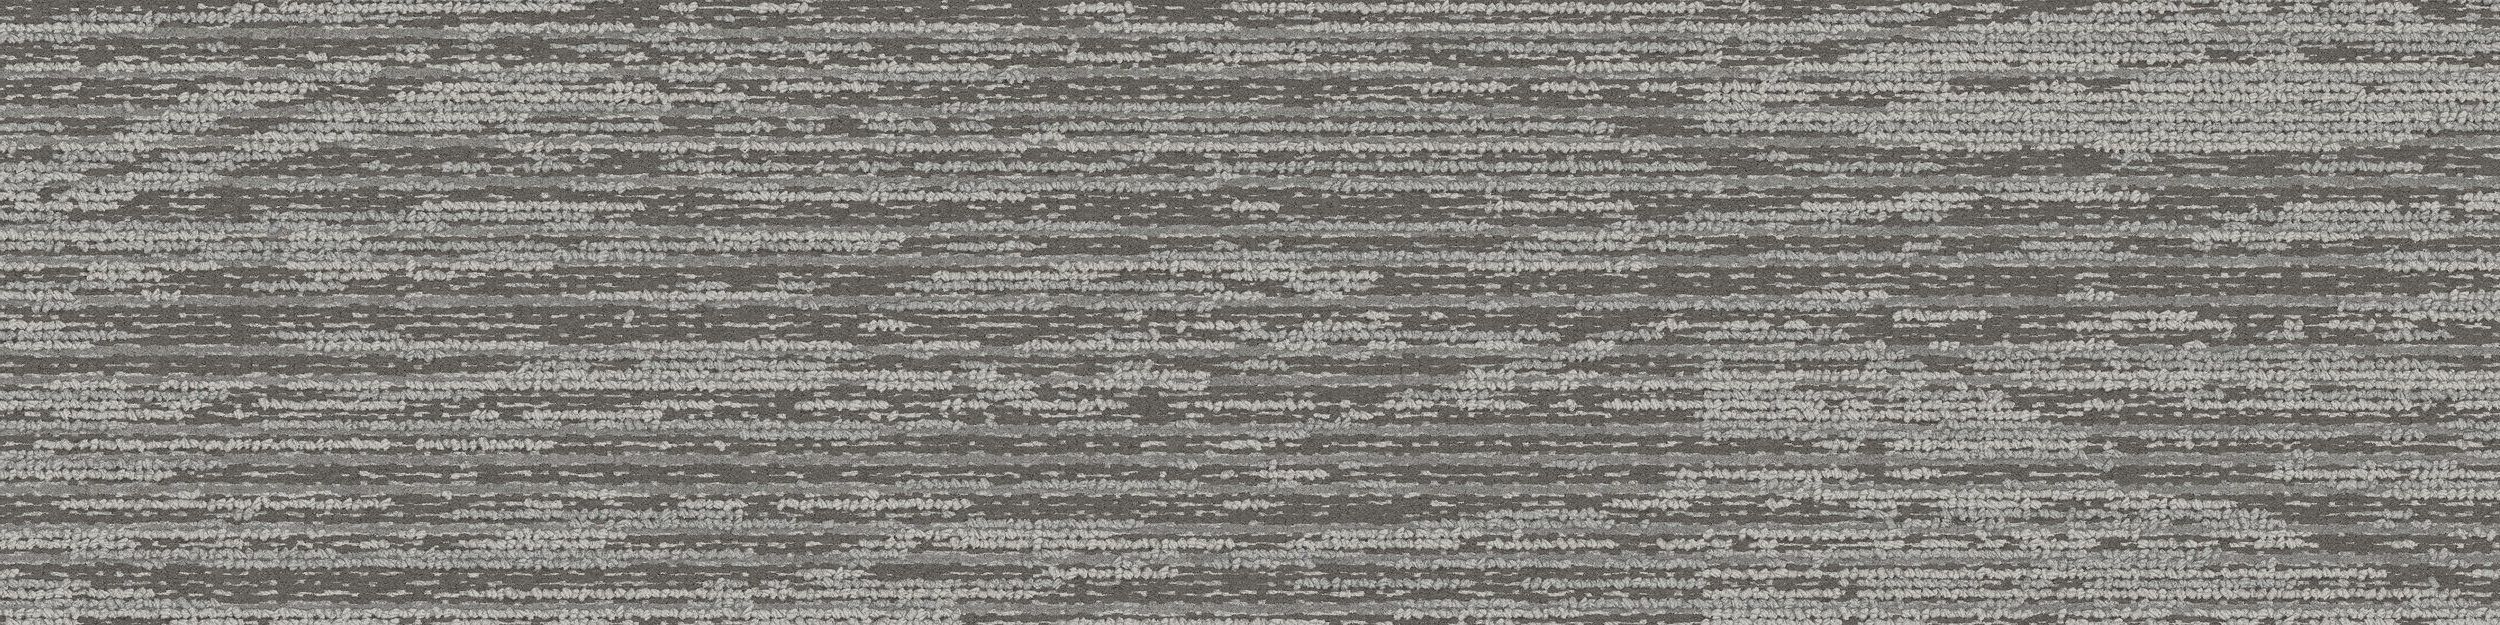 RMS 507 Carpet Tile In Taffy image number 2